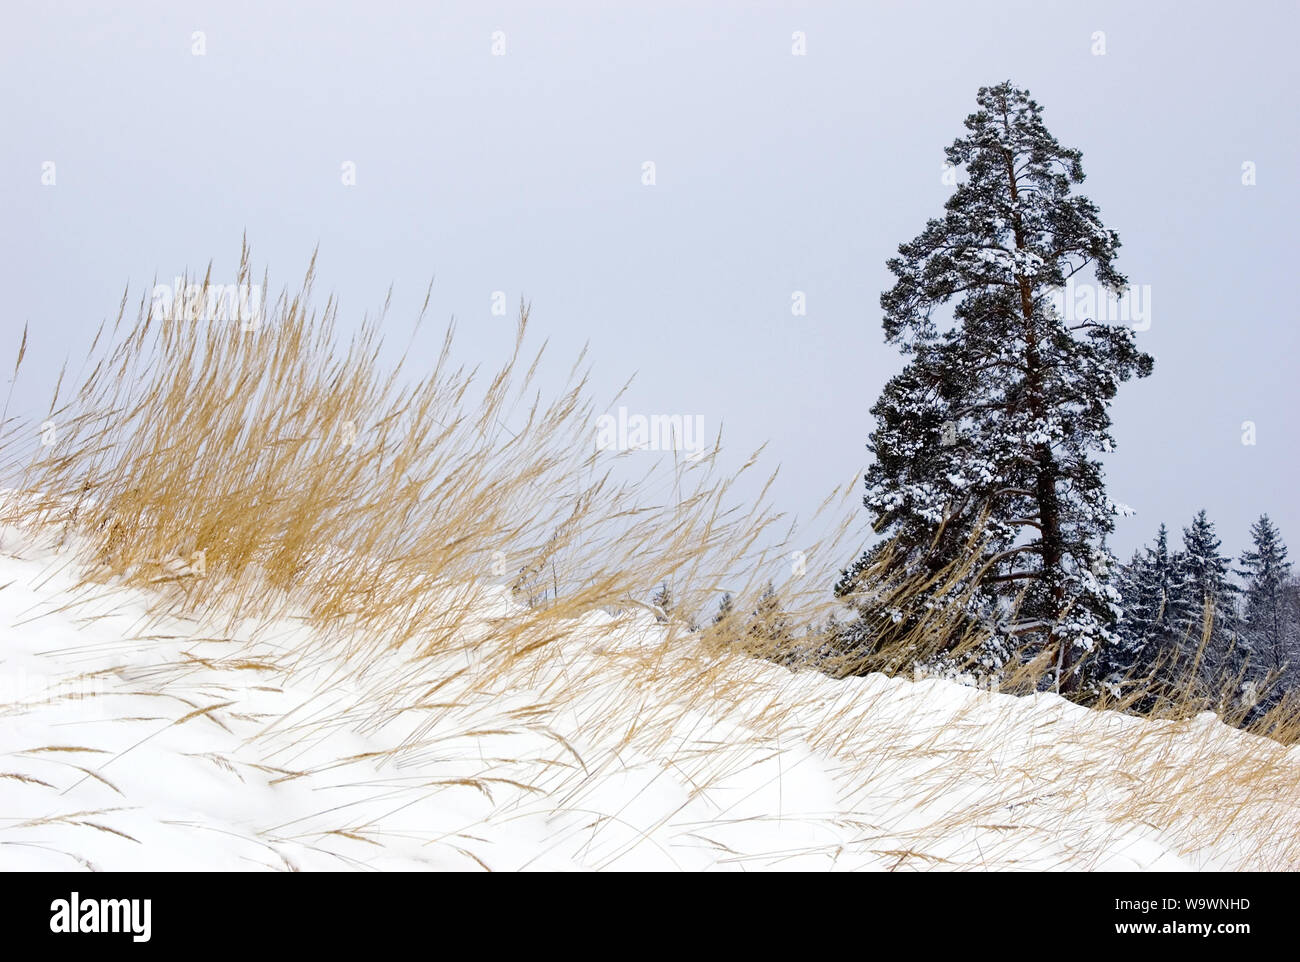 Pine tree on snow covered ground in winter Stock Photo